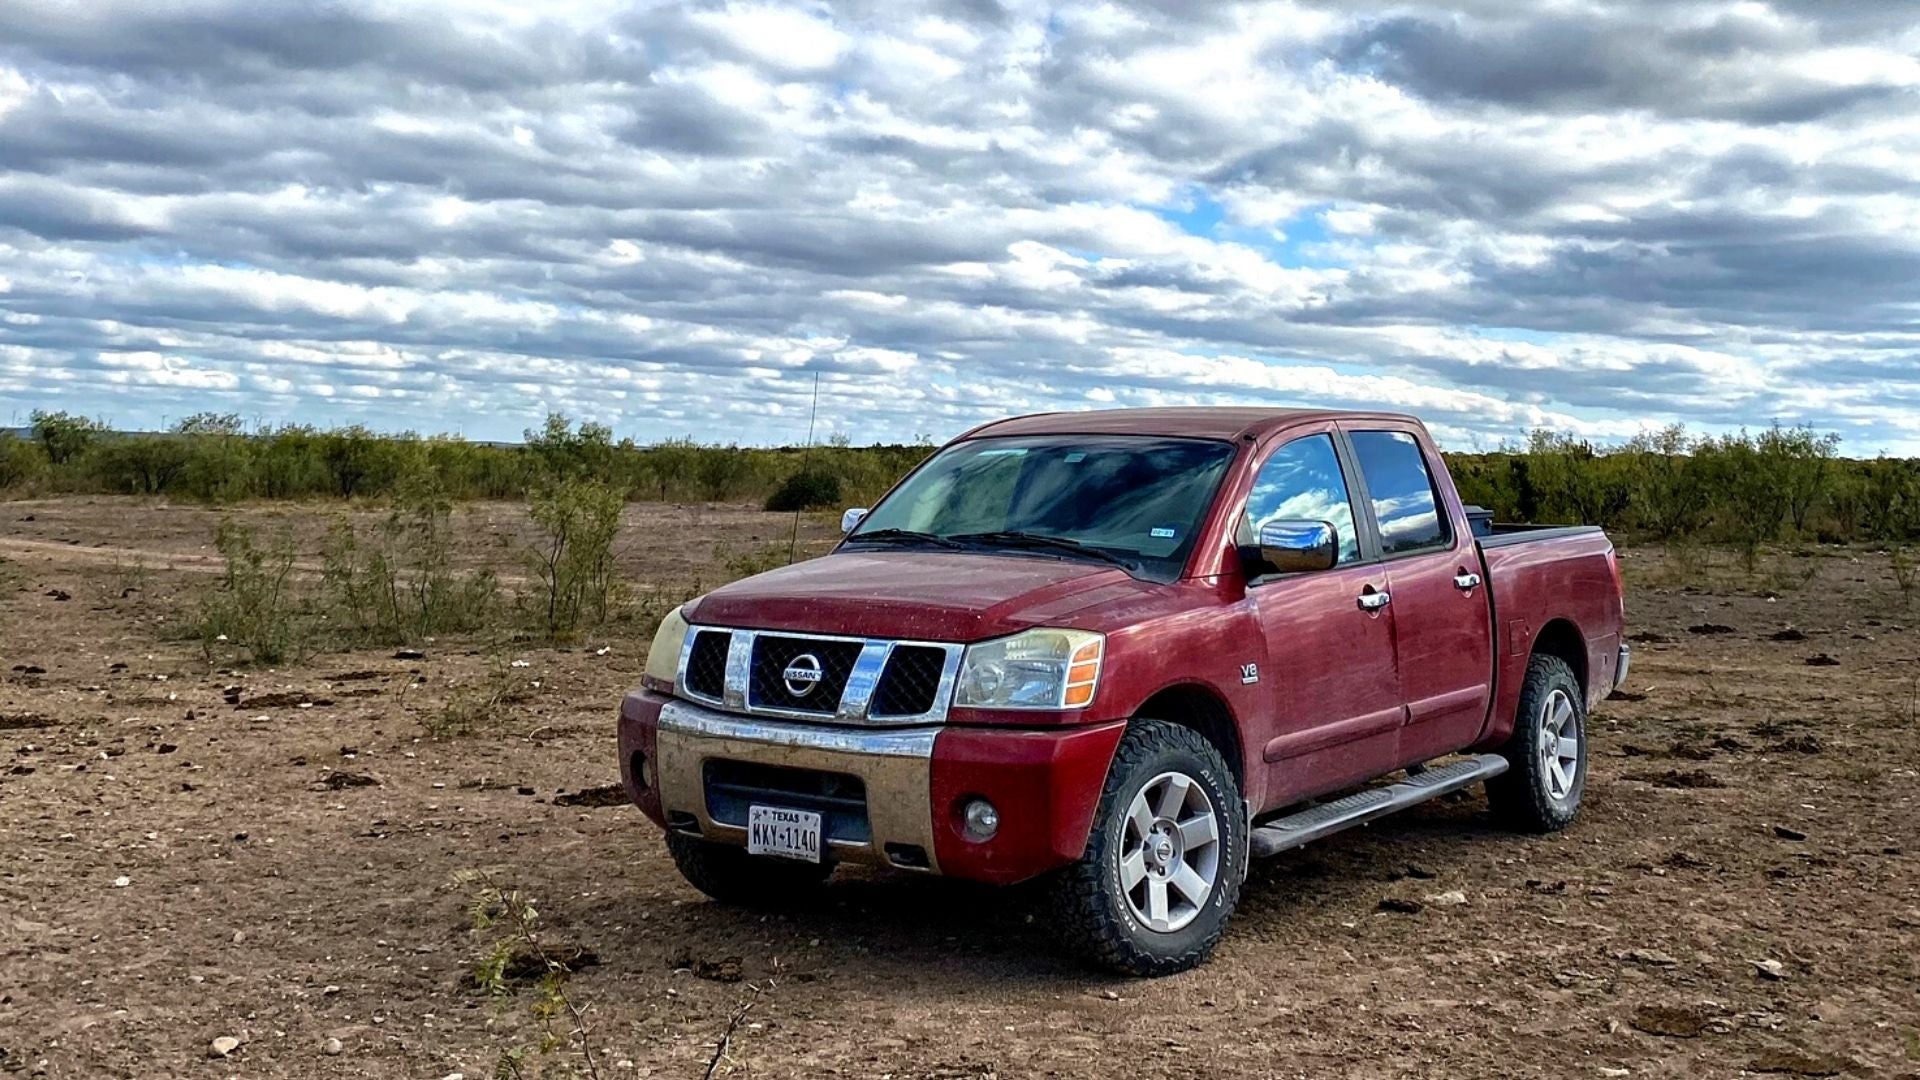 What I've Learned About Texas from the Cab of a 2004 Nissan Titan